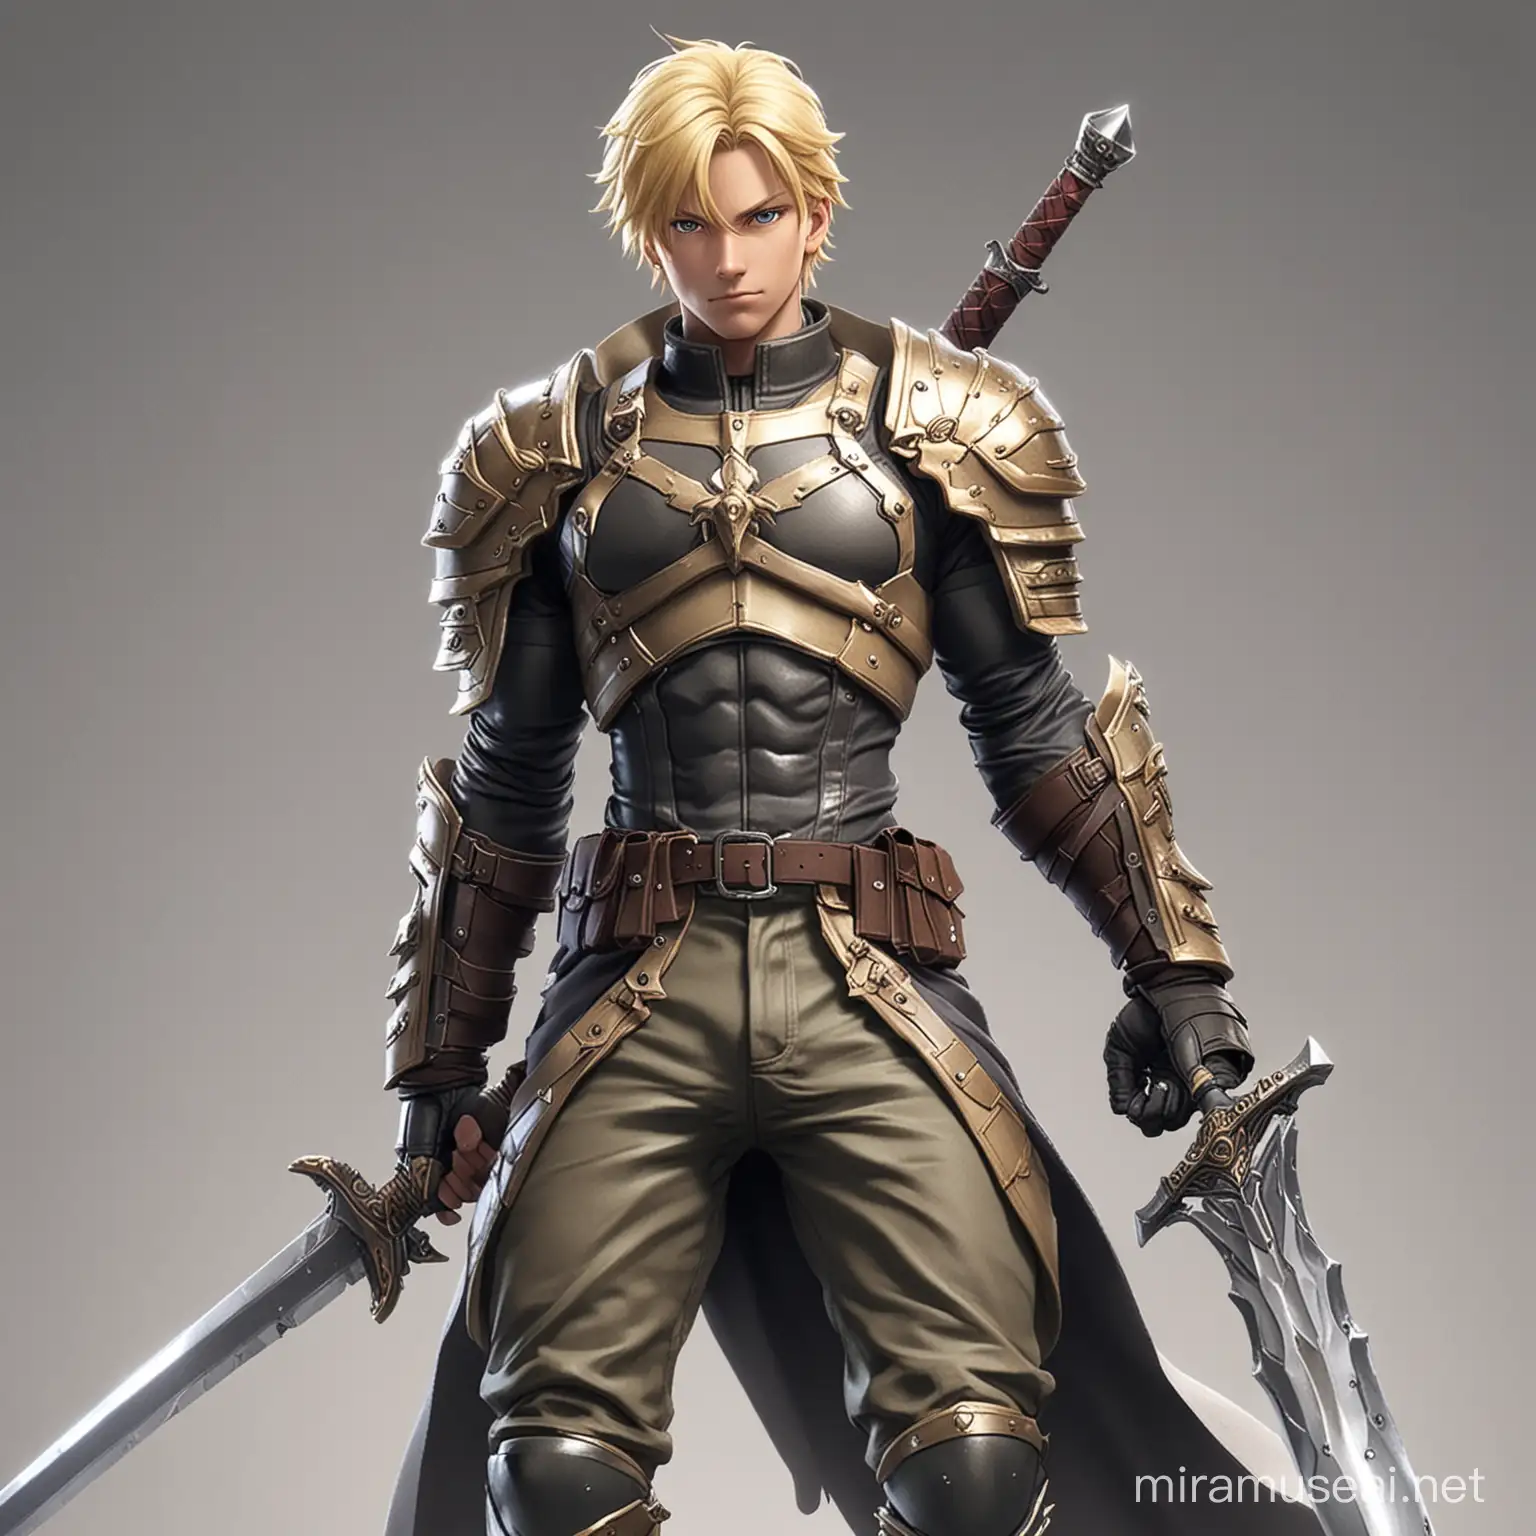 Blonde Anime SClass Soldier with Giant Sword